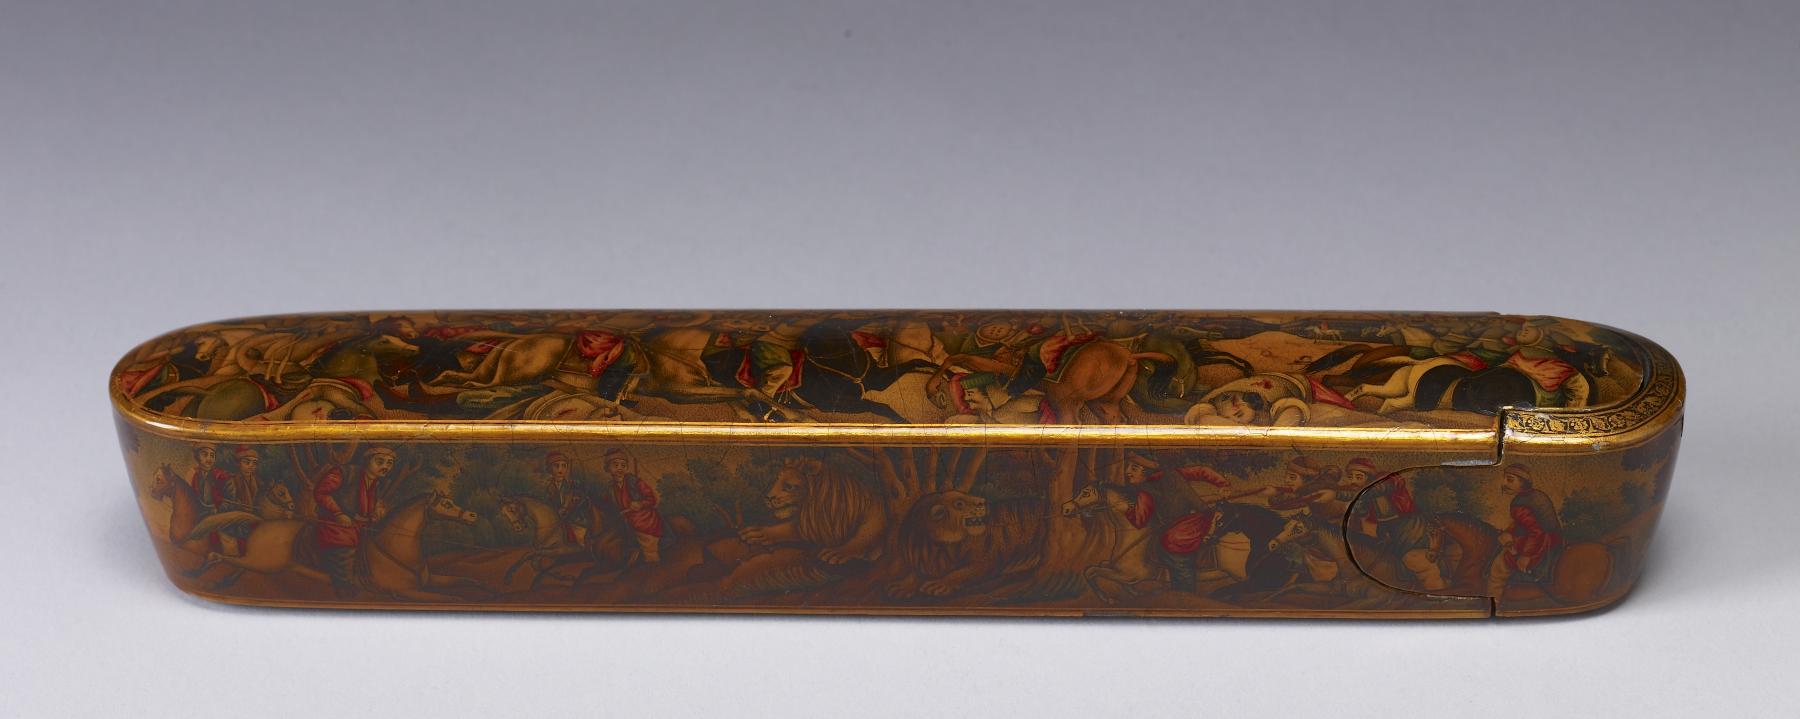 Image for Pen Box with Battle and Lion-Hunt Scenes